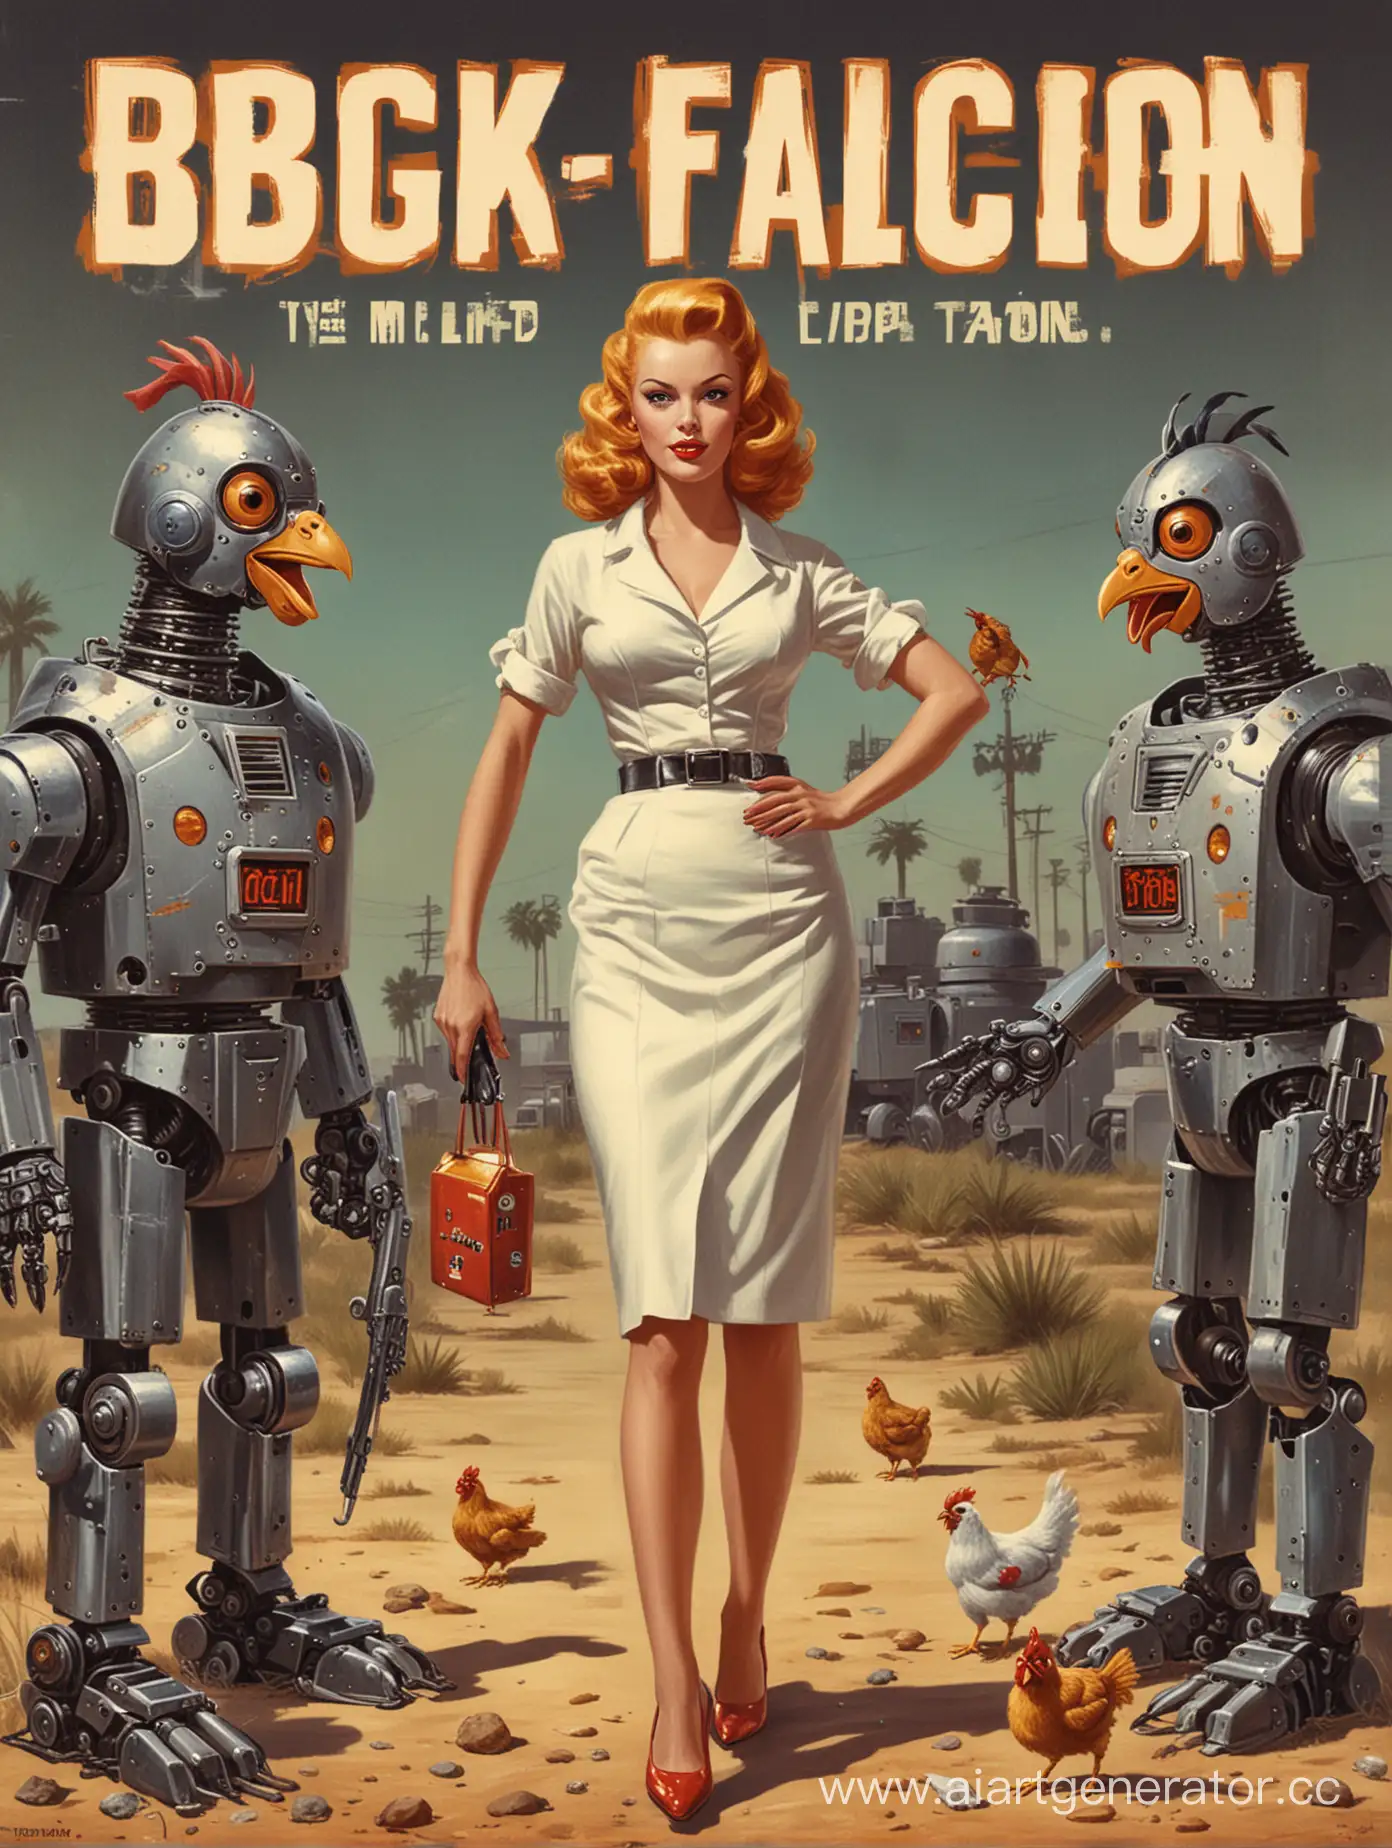 Retro-Pulp-Fiction-Book-Cover-Big-Sales-Robot-featuring-1950s-Robot-Chickens